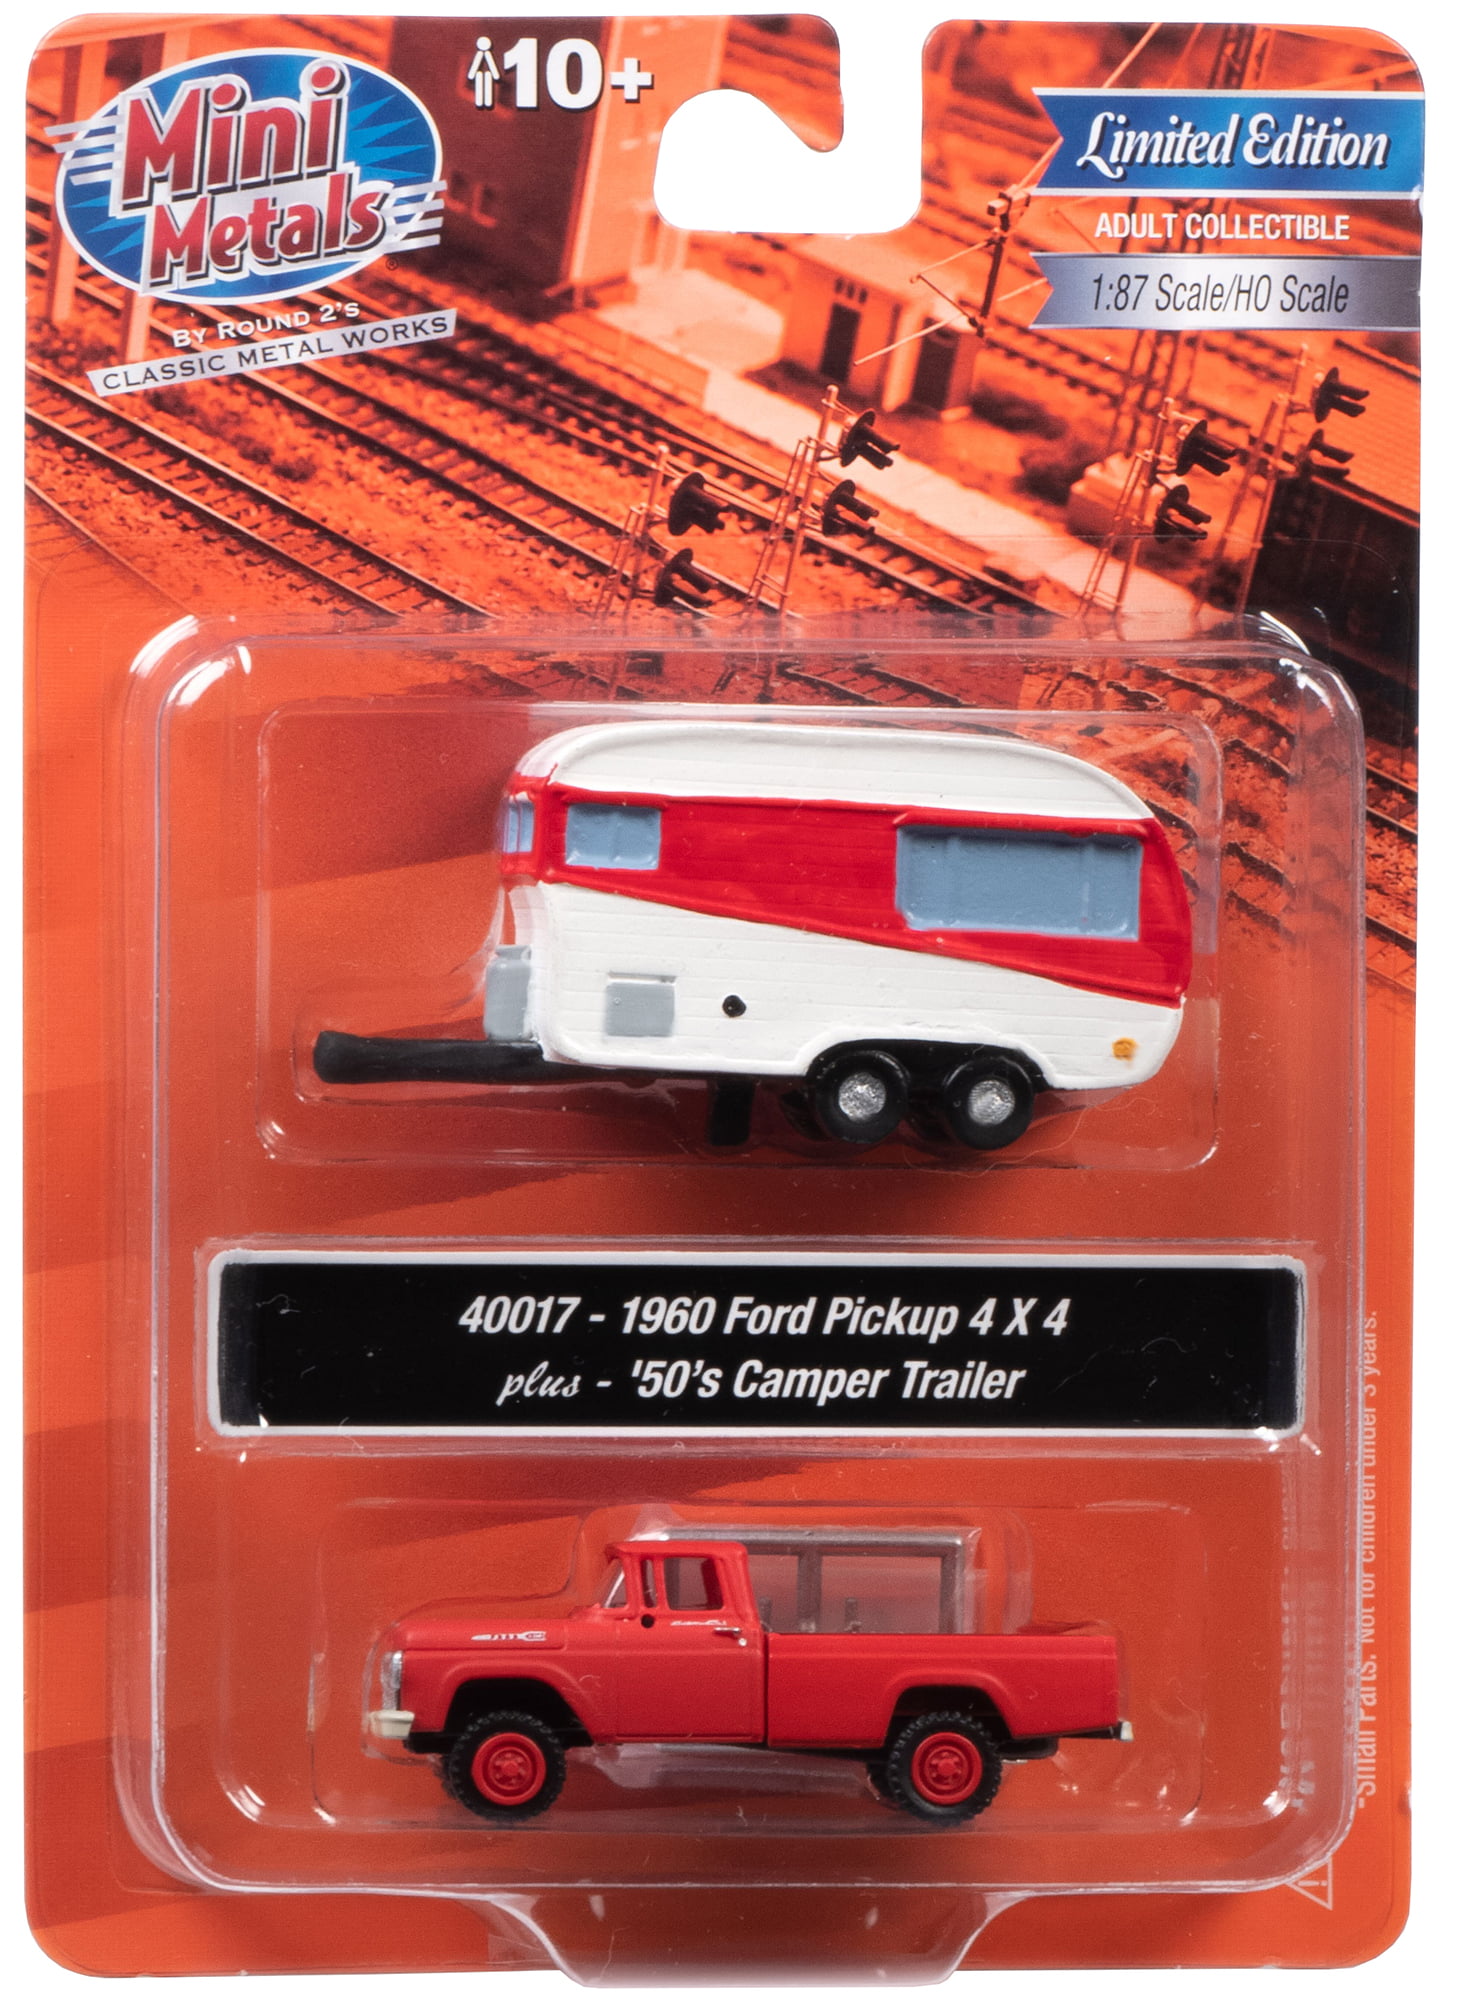 Classic Metal Works HO Scale '60 Ford Utility Truck Monte Carlo Red  30461 BTTG 